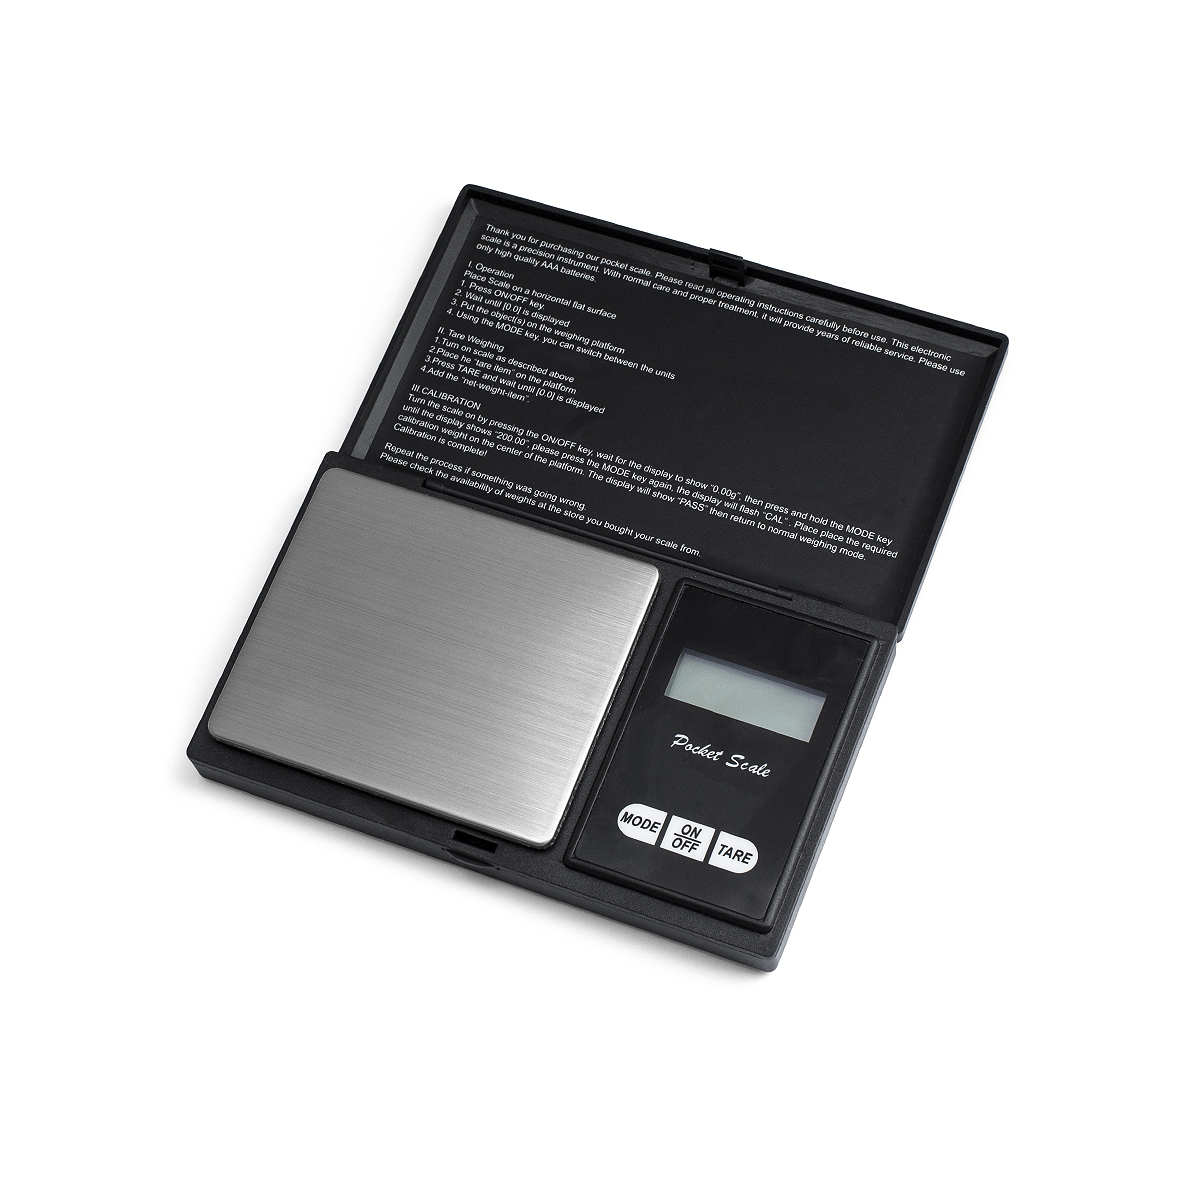 Budget Digital Scales: accurate to 0.01g (temp out of stock)